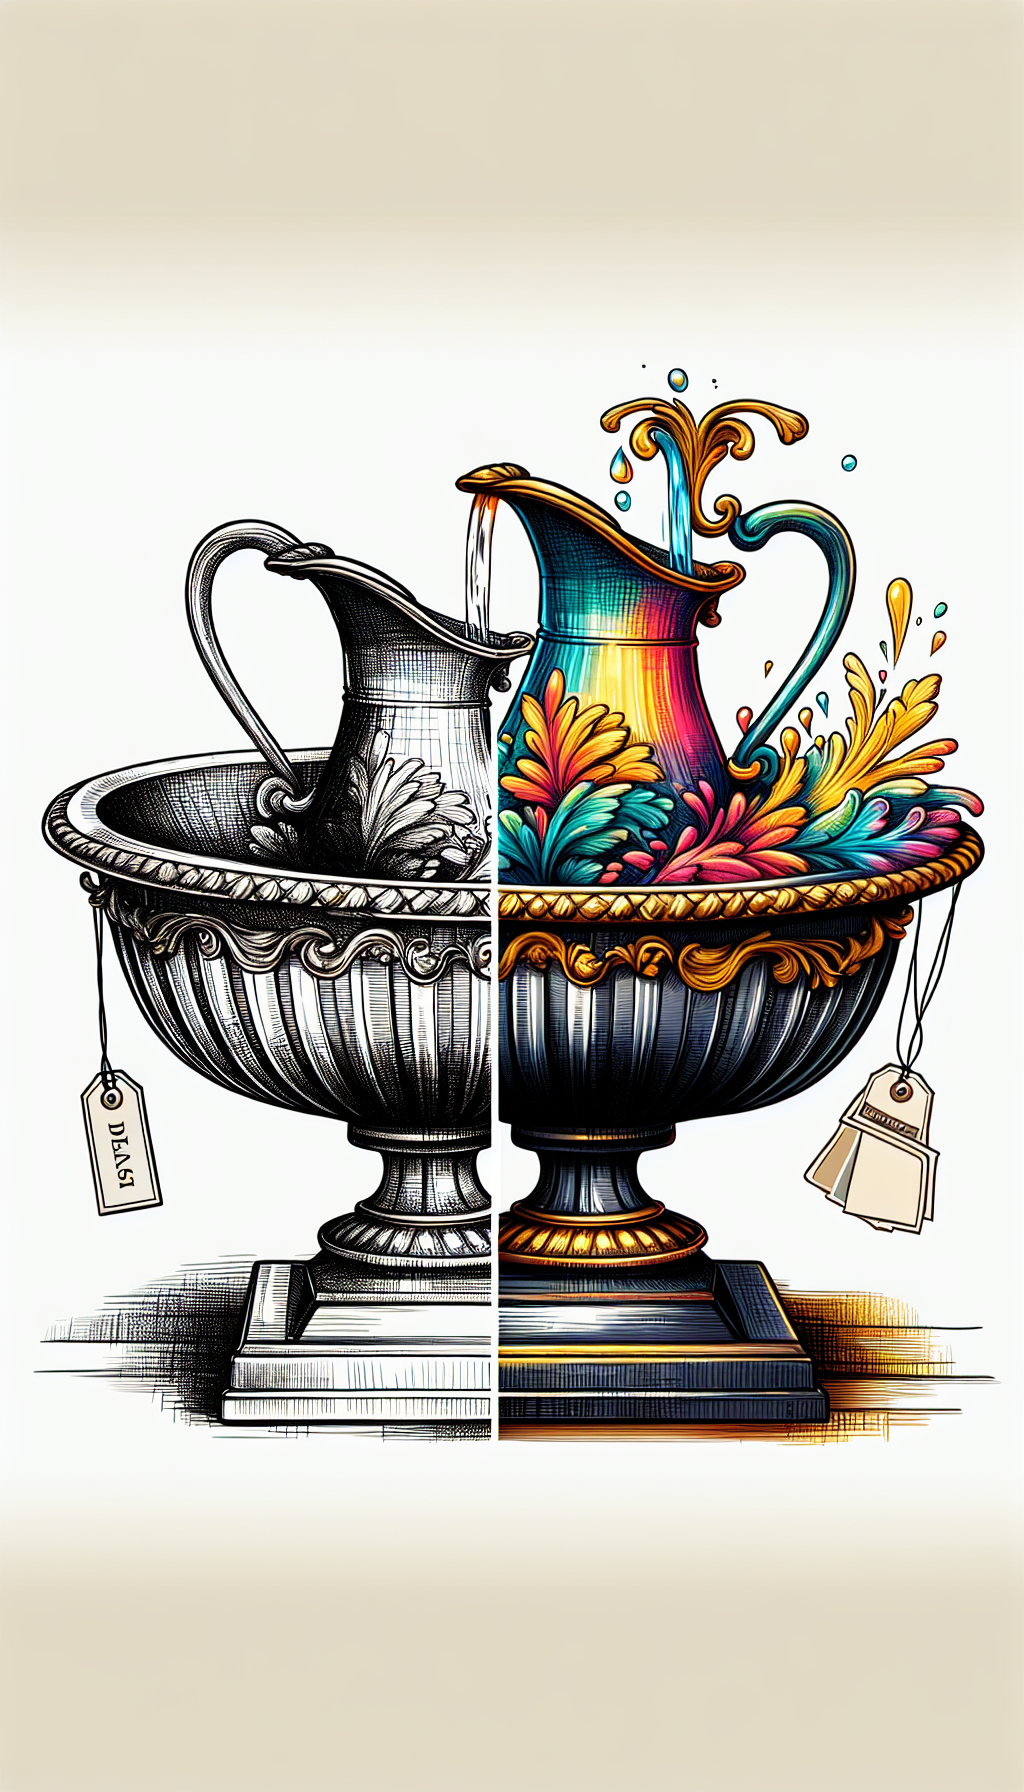 An illustration blending a sketched vintage wash basin and pitcher on an ornate stand transitions from fine line art to a vibrant, colorful collectible version with gold leaf accents. Each segment of the wash basin evolves in detail and hue, underlined by price tags increasing in value, symbolizing its journey from a functional item to a prized antique collectible.